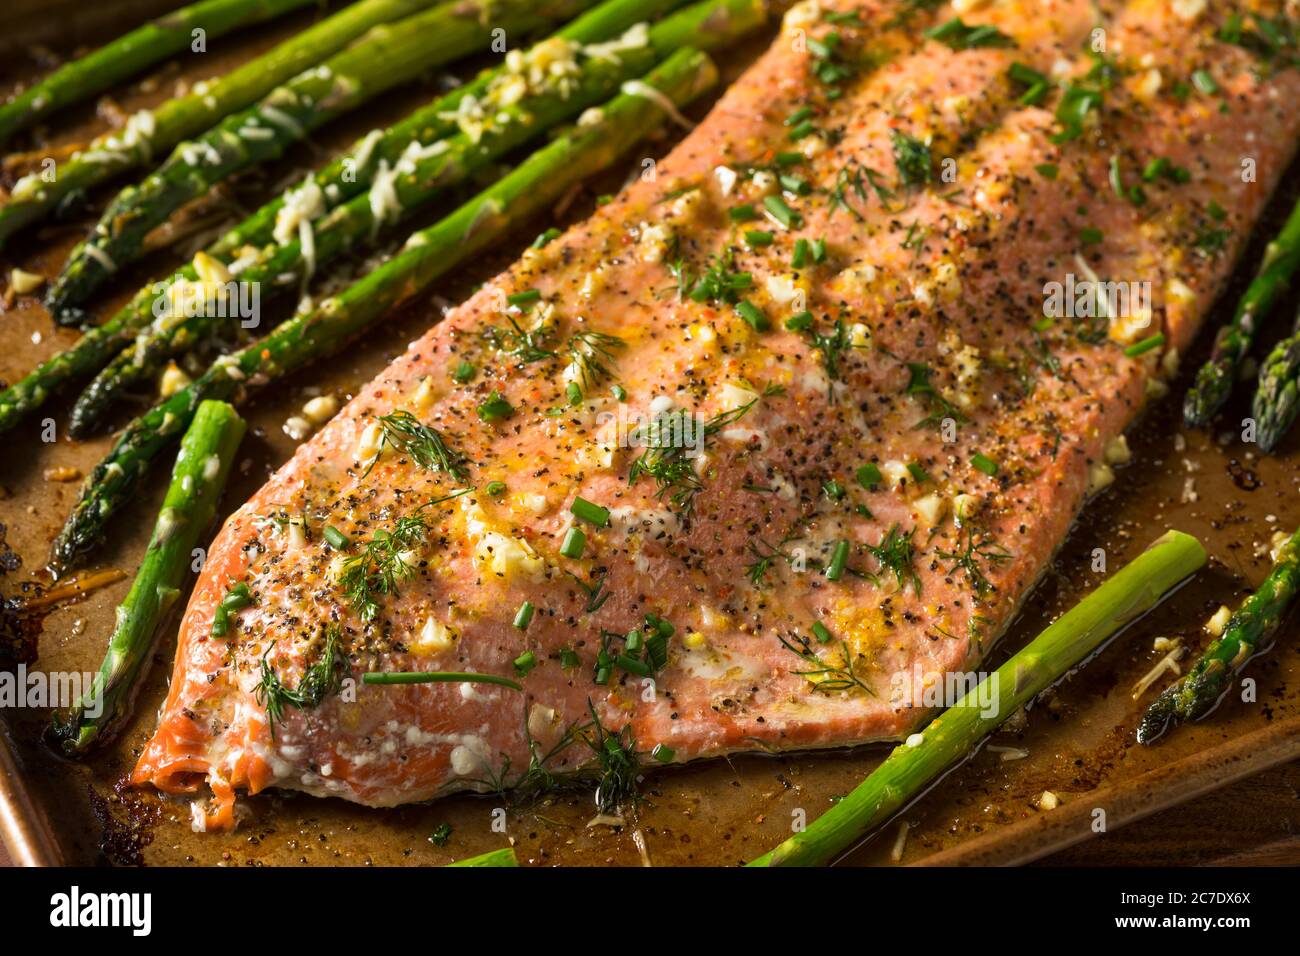 Homemade Roasted Salmon Filet and Asparagus with Garlic and Dill Stock Photo